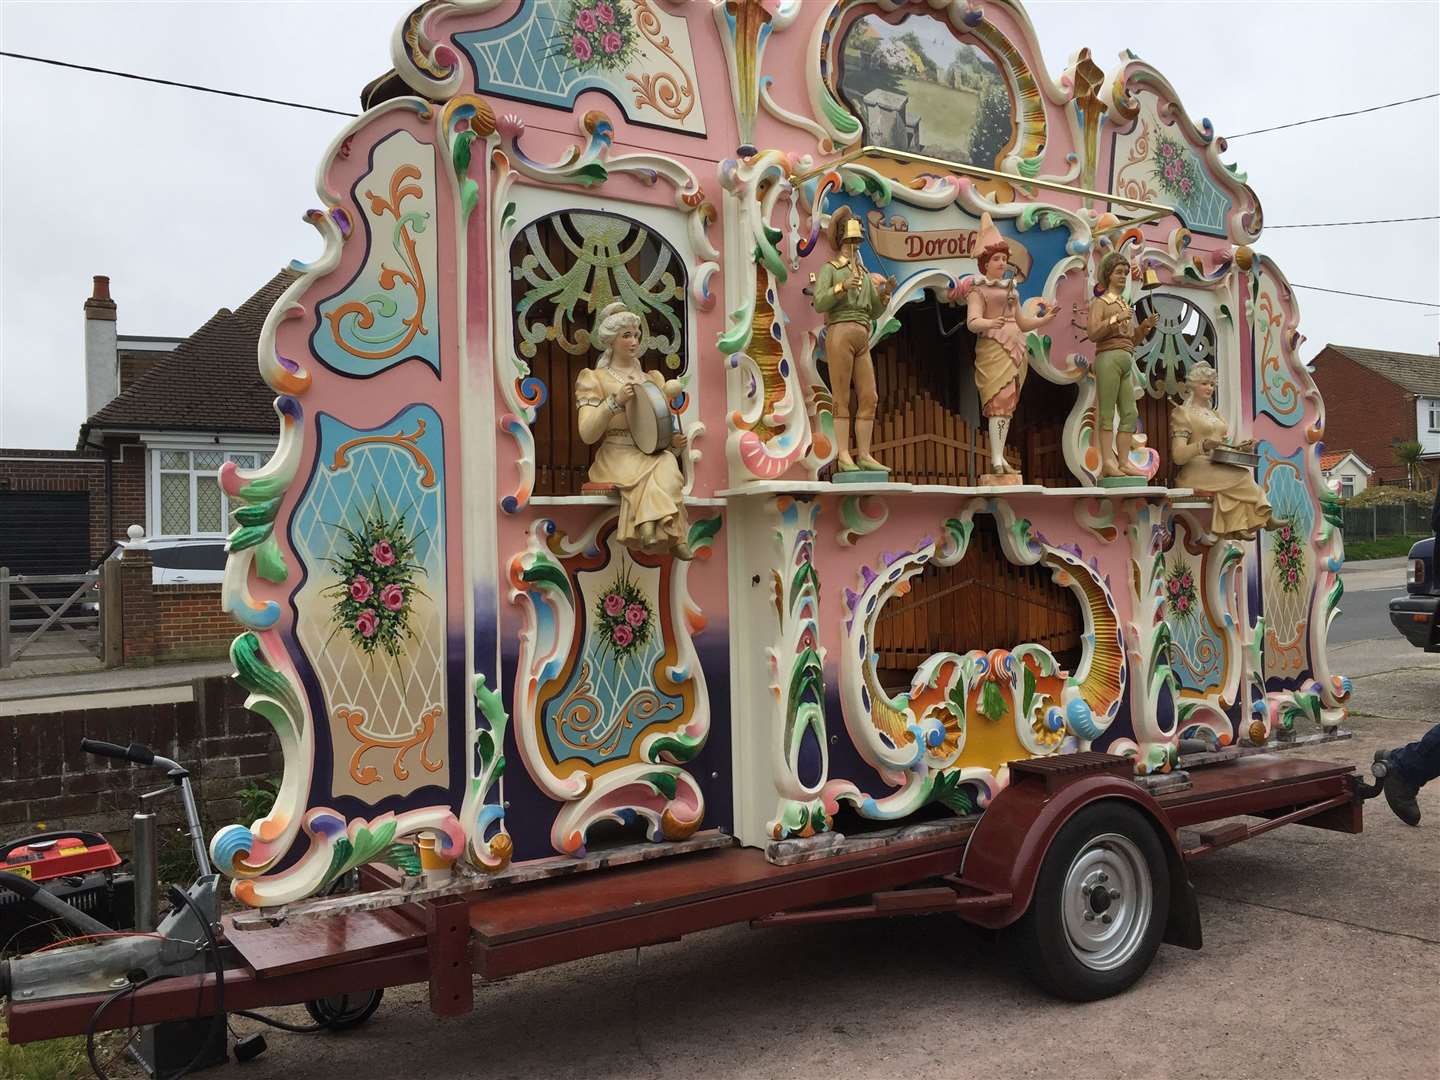 The street organ outside Yvonne Burgess' home in Swalecliffe